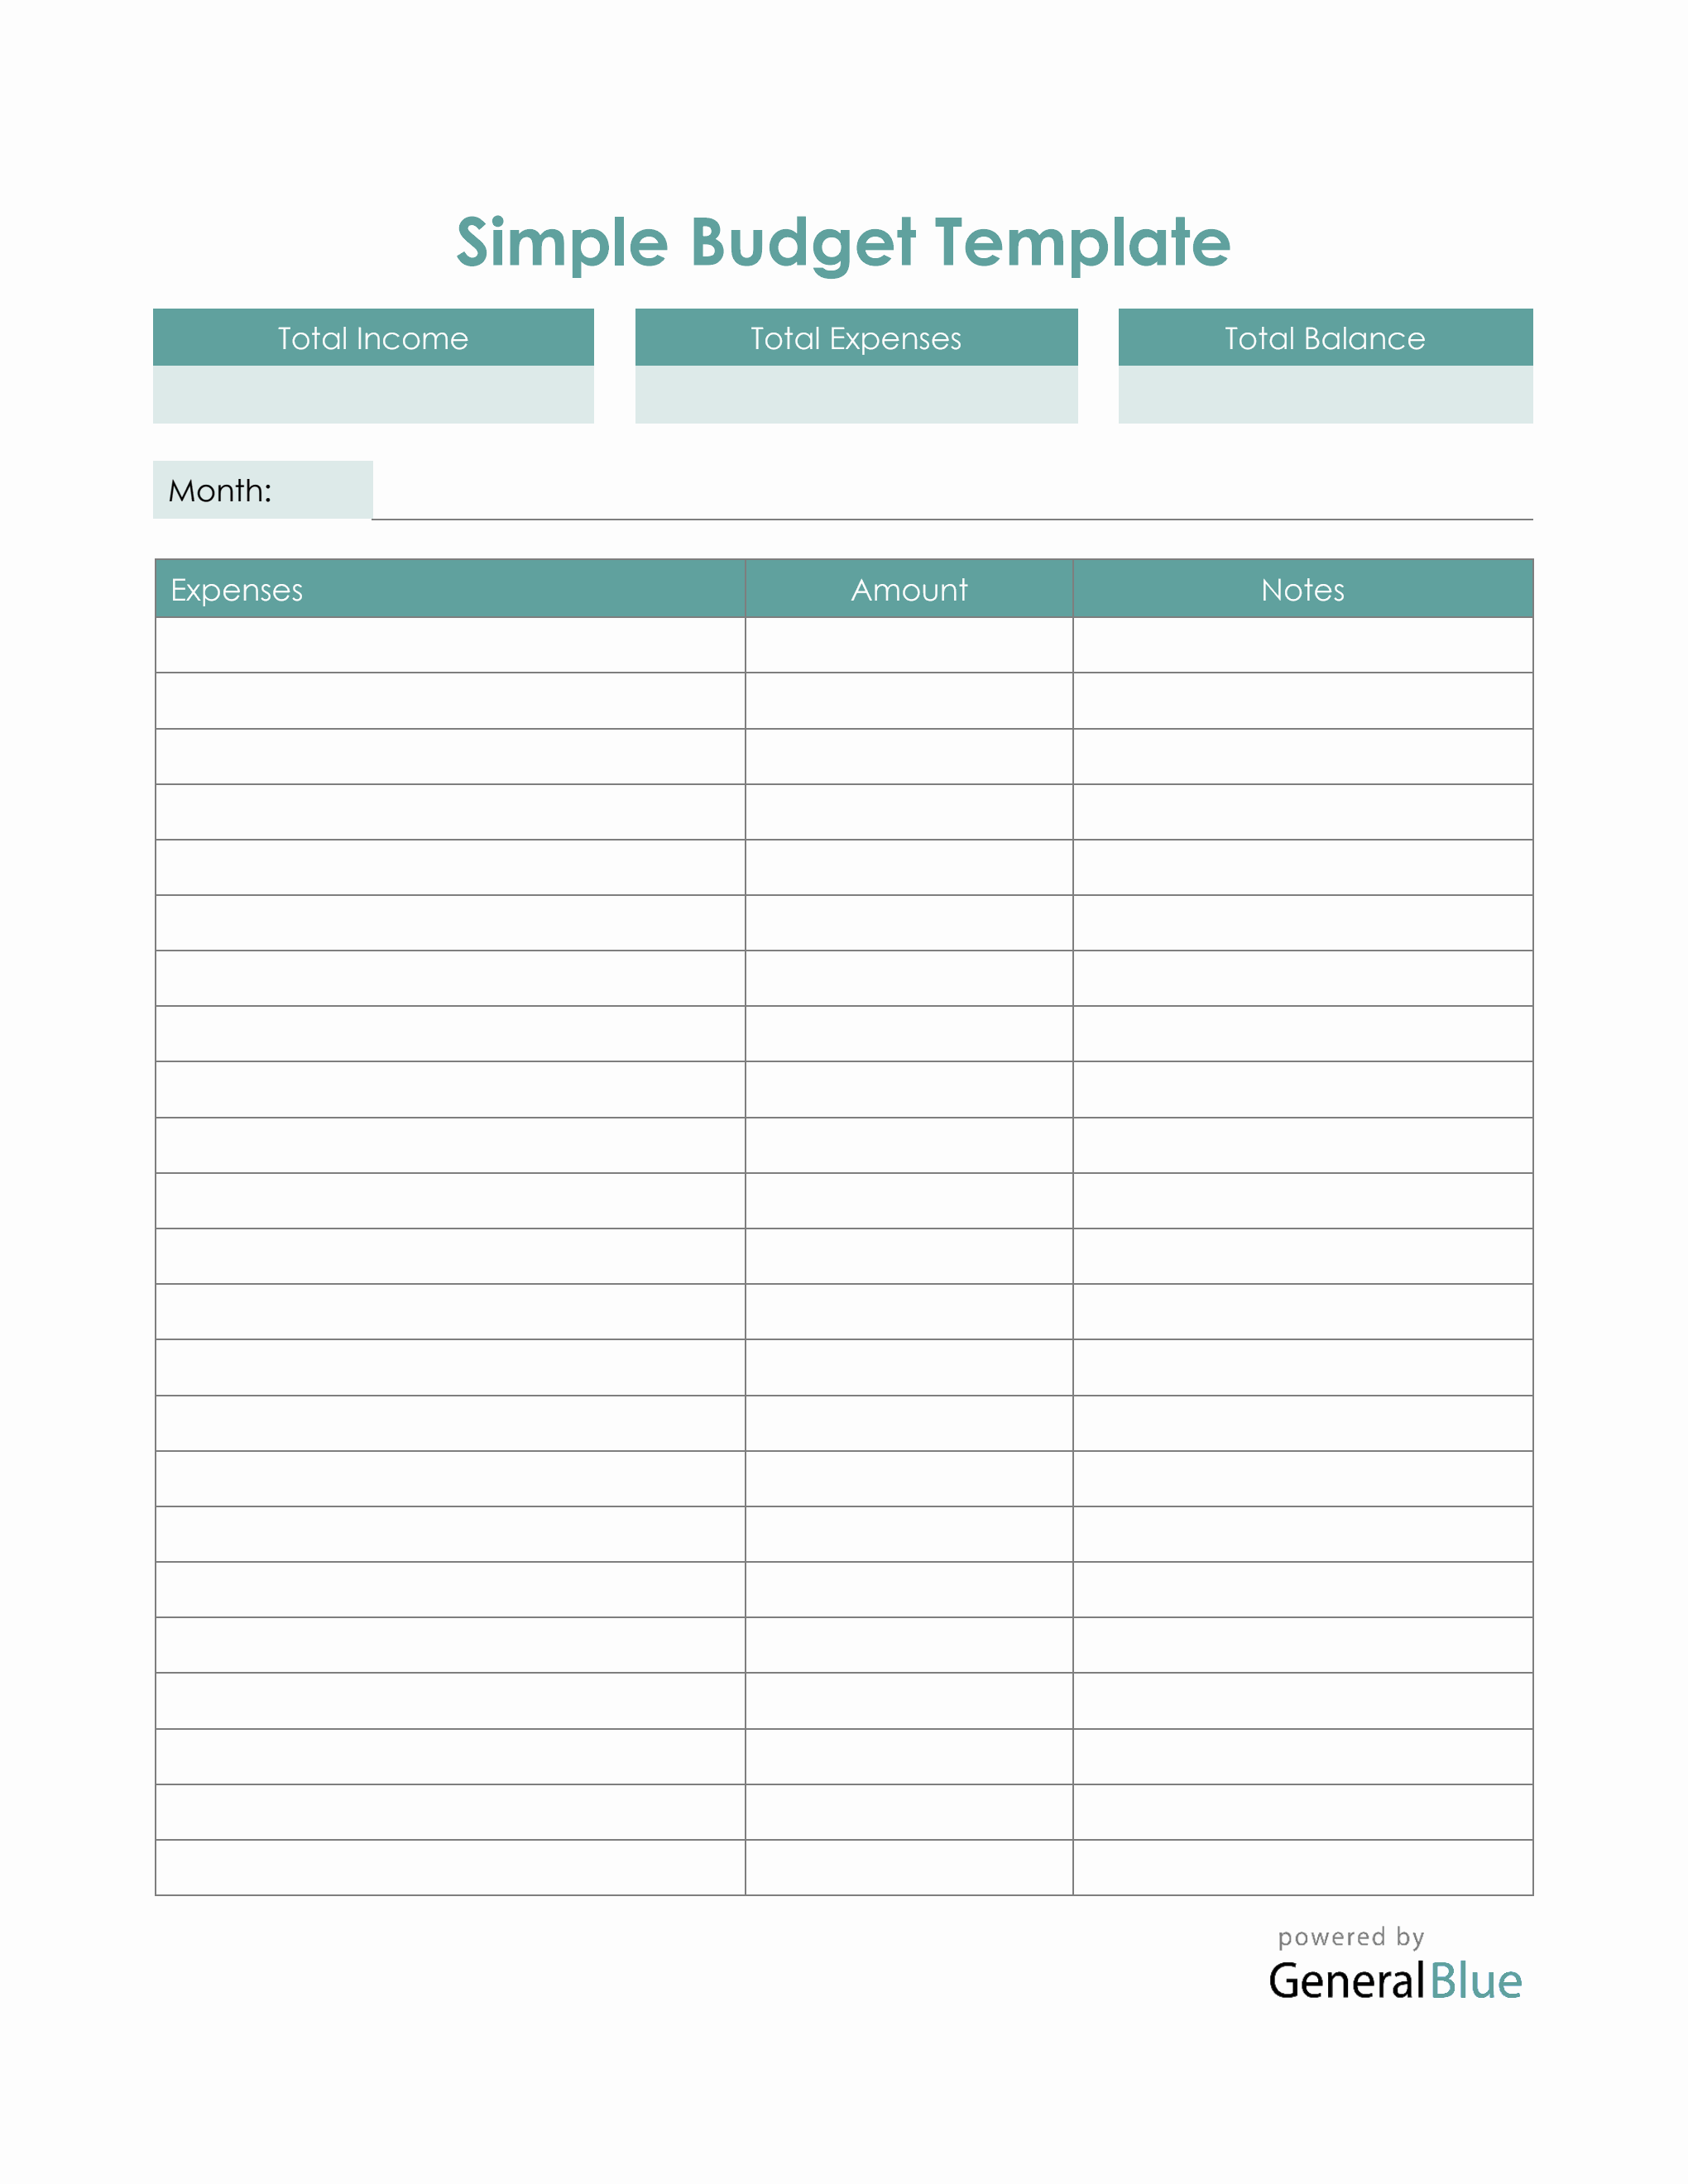 goodnotes-monthly-budget-template-free